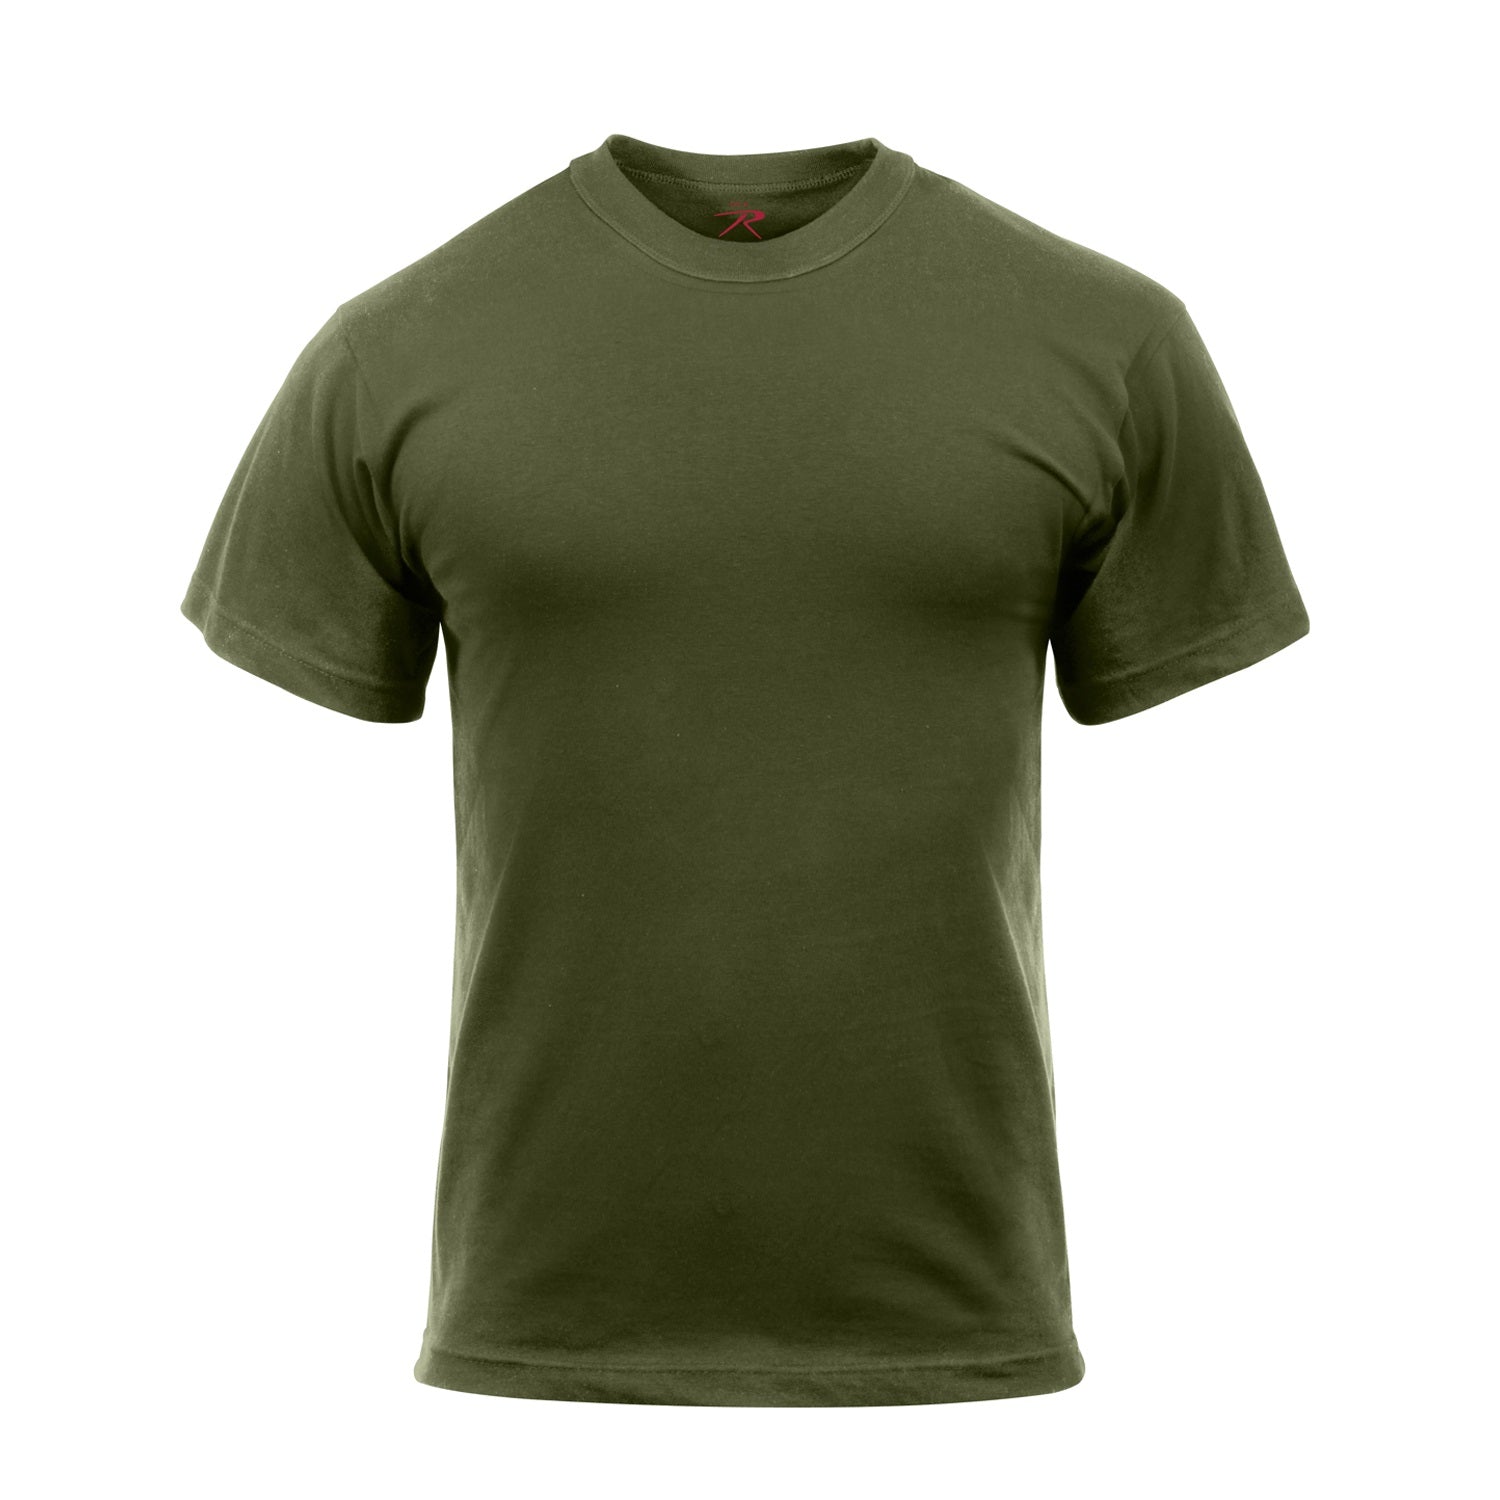 Rothco Solid Color Cotton / Polyester Blend Military T-Shirt Olive Drab